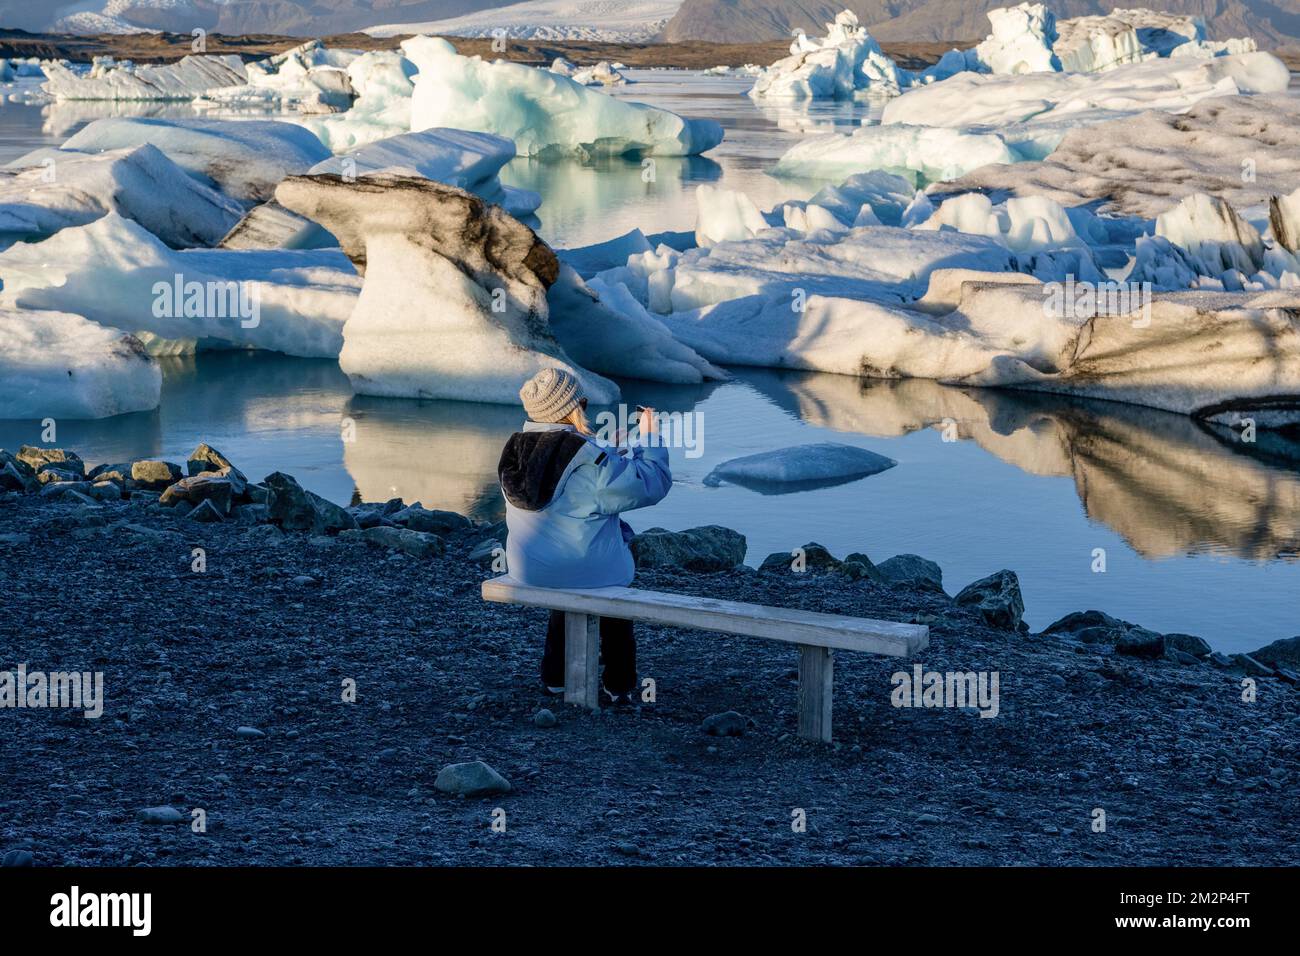 October 18, 2022, JÃ¶kulsÃrlÃ³n, JÃ¶kulsÃrlÃ³n, Iceland: A person is seen taking pictures near the shore of Lake JÃ¶kulsÃrlÃ³n. JÃ¶kulsÃrlÃ³n is a lake located in southern Iceland, with an area of 20 km2 and a depth of over 200 meters. Until less than 100 years ago, the BreiÃ°amerkurjÃ¶kull glacier (part of the VatnajÃ¶kull glacier) extended even beyond the ring road. Due to rising temperatures, the glacier has retreated, creating this impressive glacial lagoon. (Credit Image: © Jorge Castellanos/SOPA Images via ZUMA Press Wire) Stock Photo